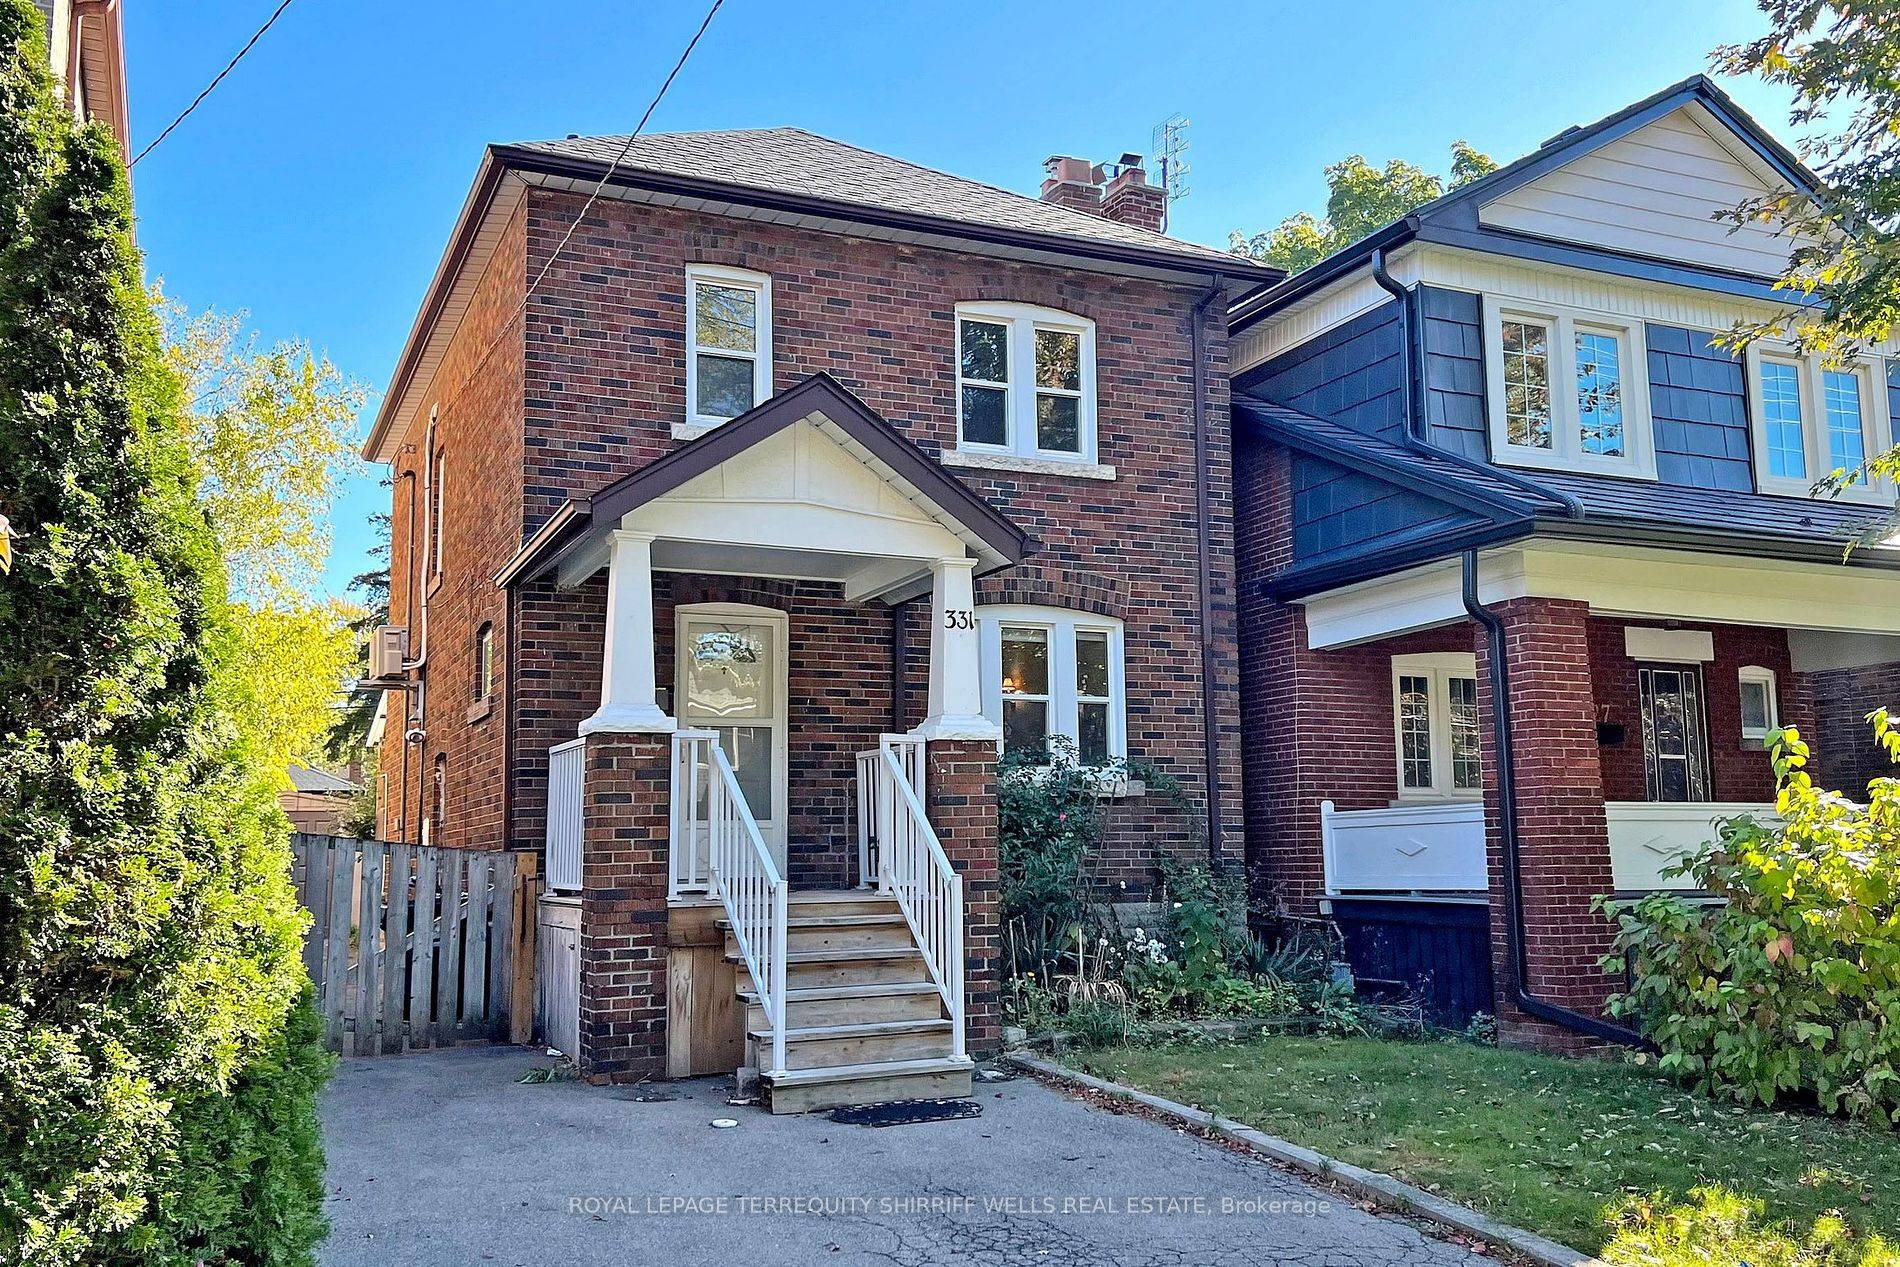 Don't miss this huge opportunity to acquire a full sized detached 2 storey brick home in midtown Toronto with a private driveway on an oversized 28' x 150' prime lot ...